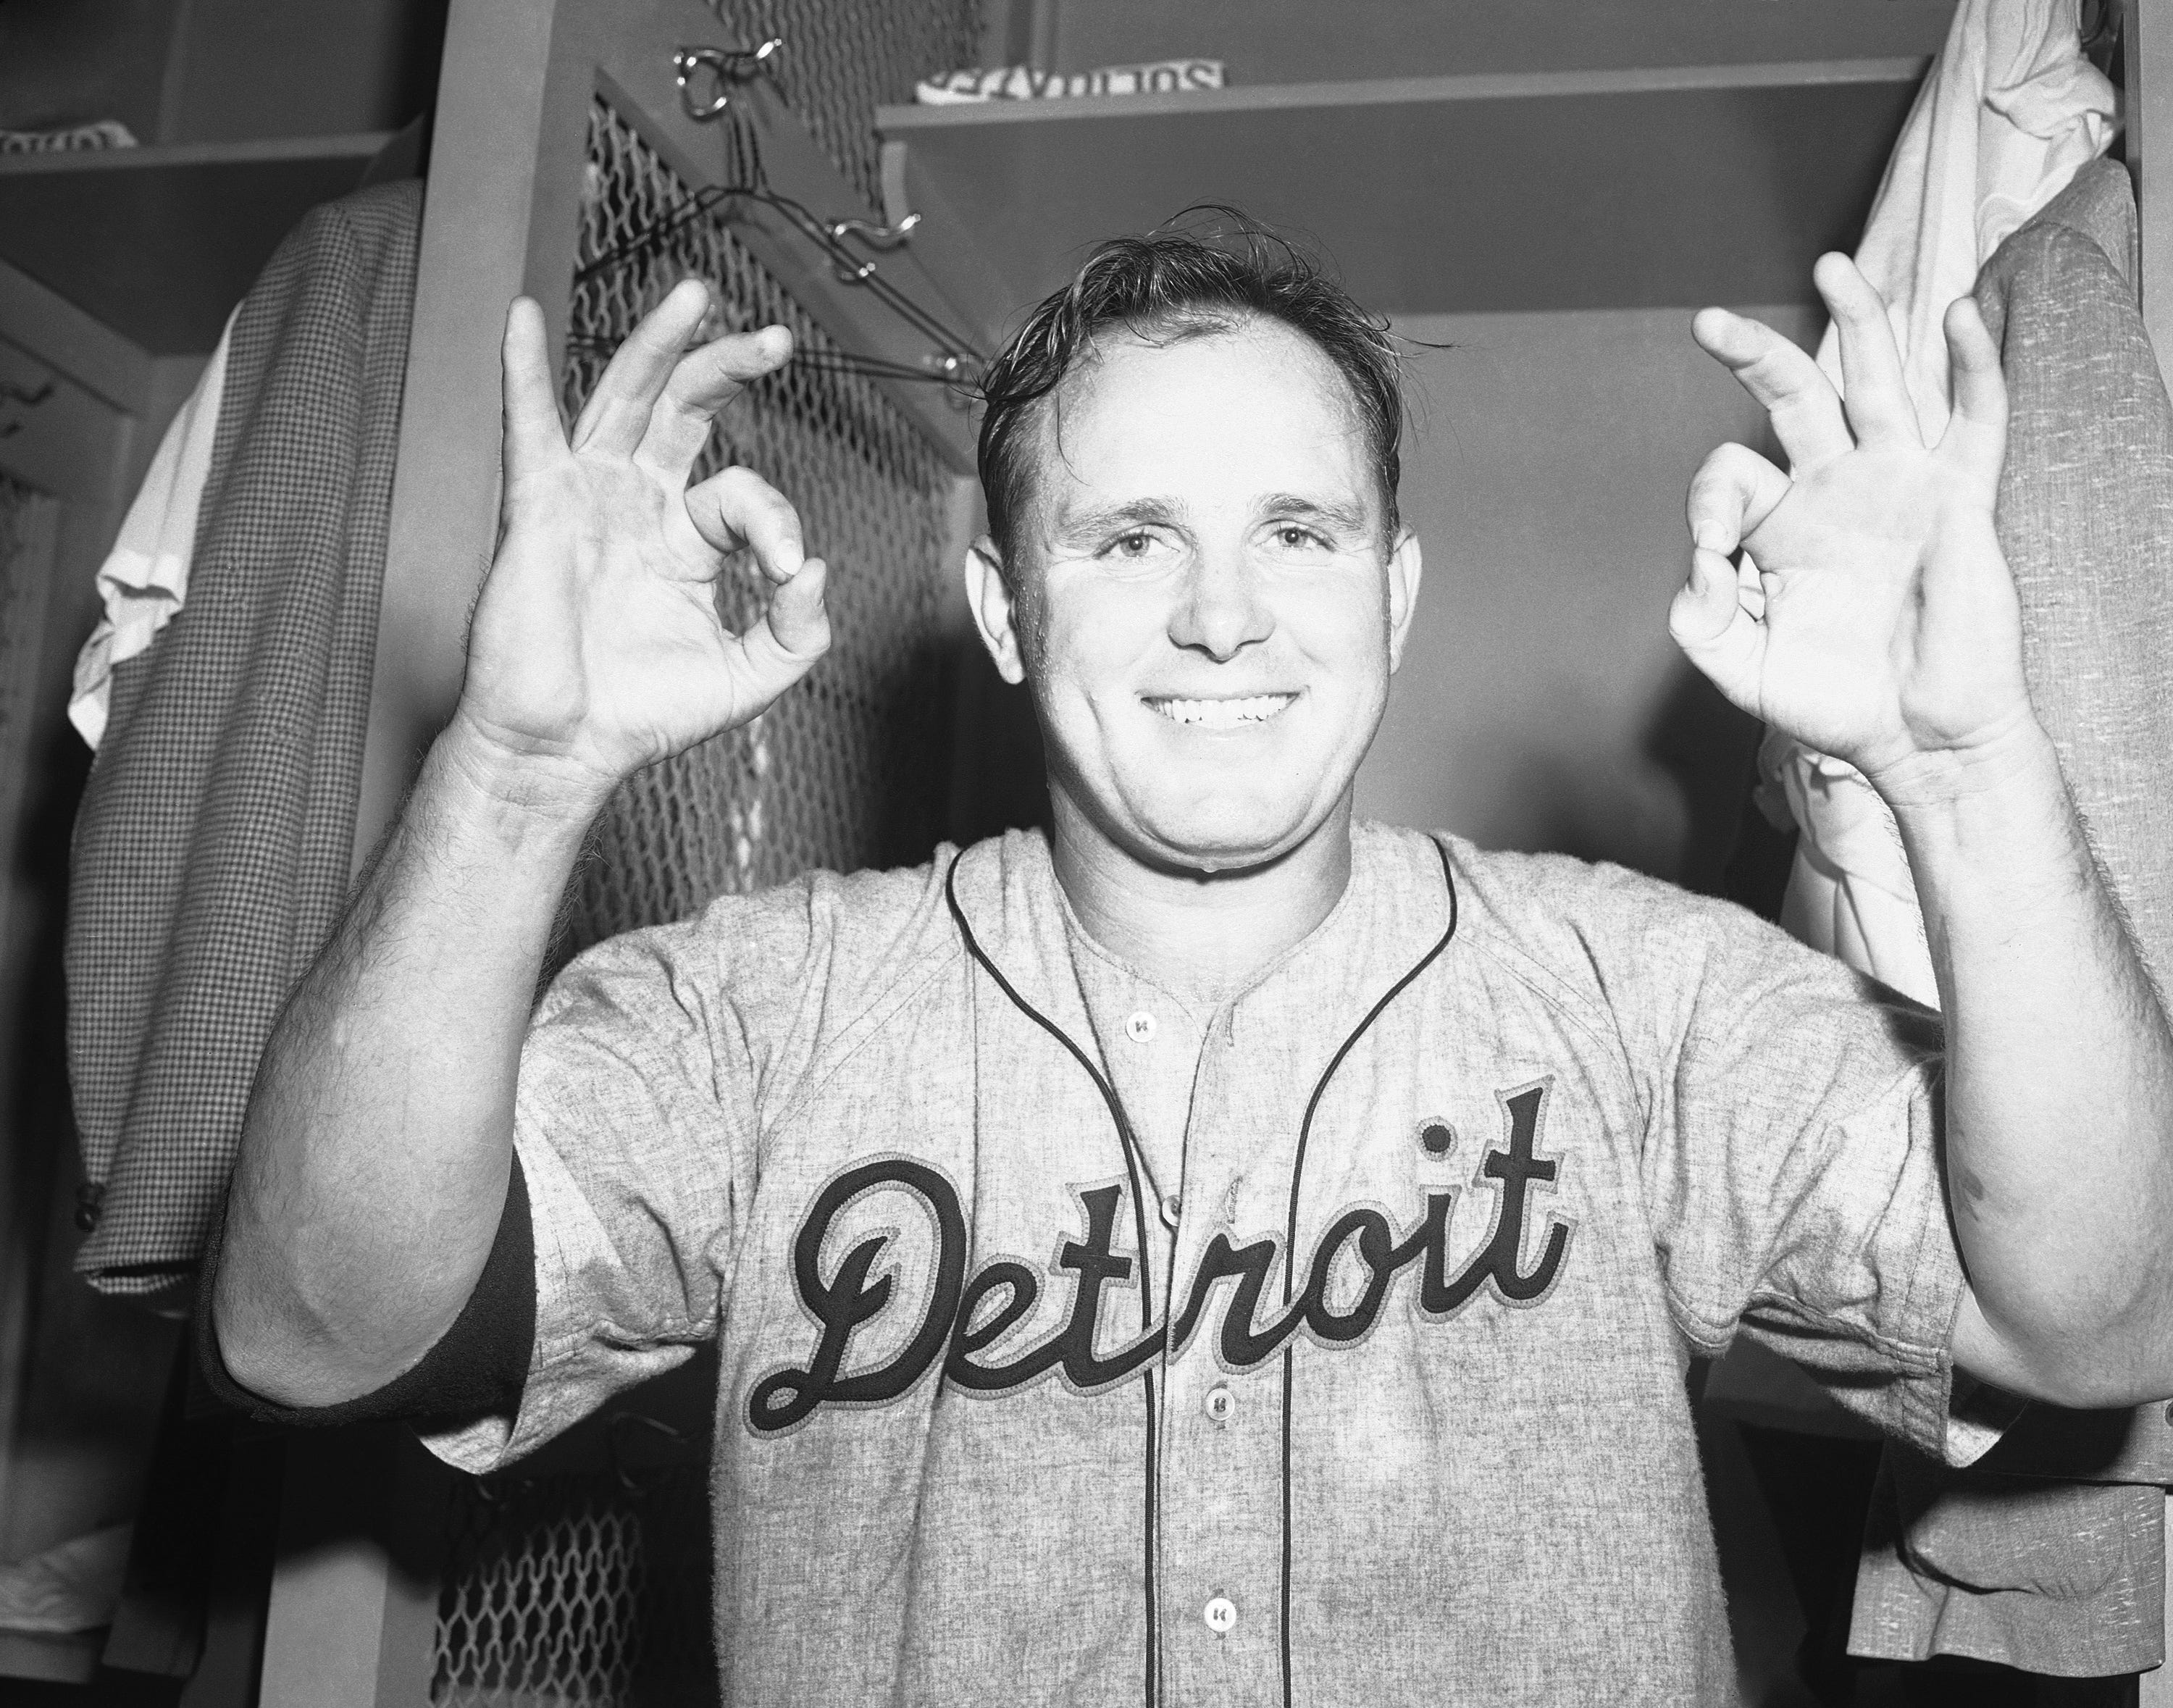 Virgil Trucks, Aug. 25, 1952: The Tigers didn't have to wait another four decades for their next no-hitter, and neither did Trucks. Just three months later, Trucks twirled his second no-hitter, besting the New York Yankees, 1-0. Trucks' two no-hitters came during an otherwise dreadful season for the pitcher and the Tigers. Trucks finished with a 5-19 record, and the Tigers were 50-104.